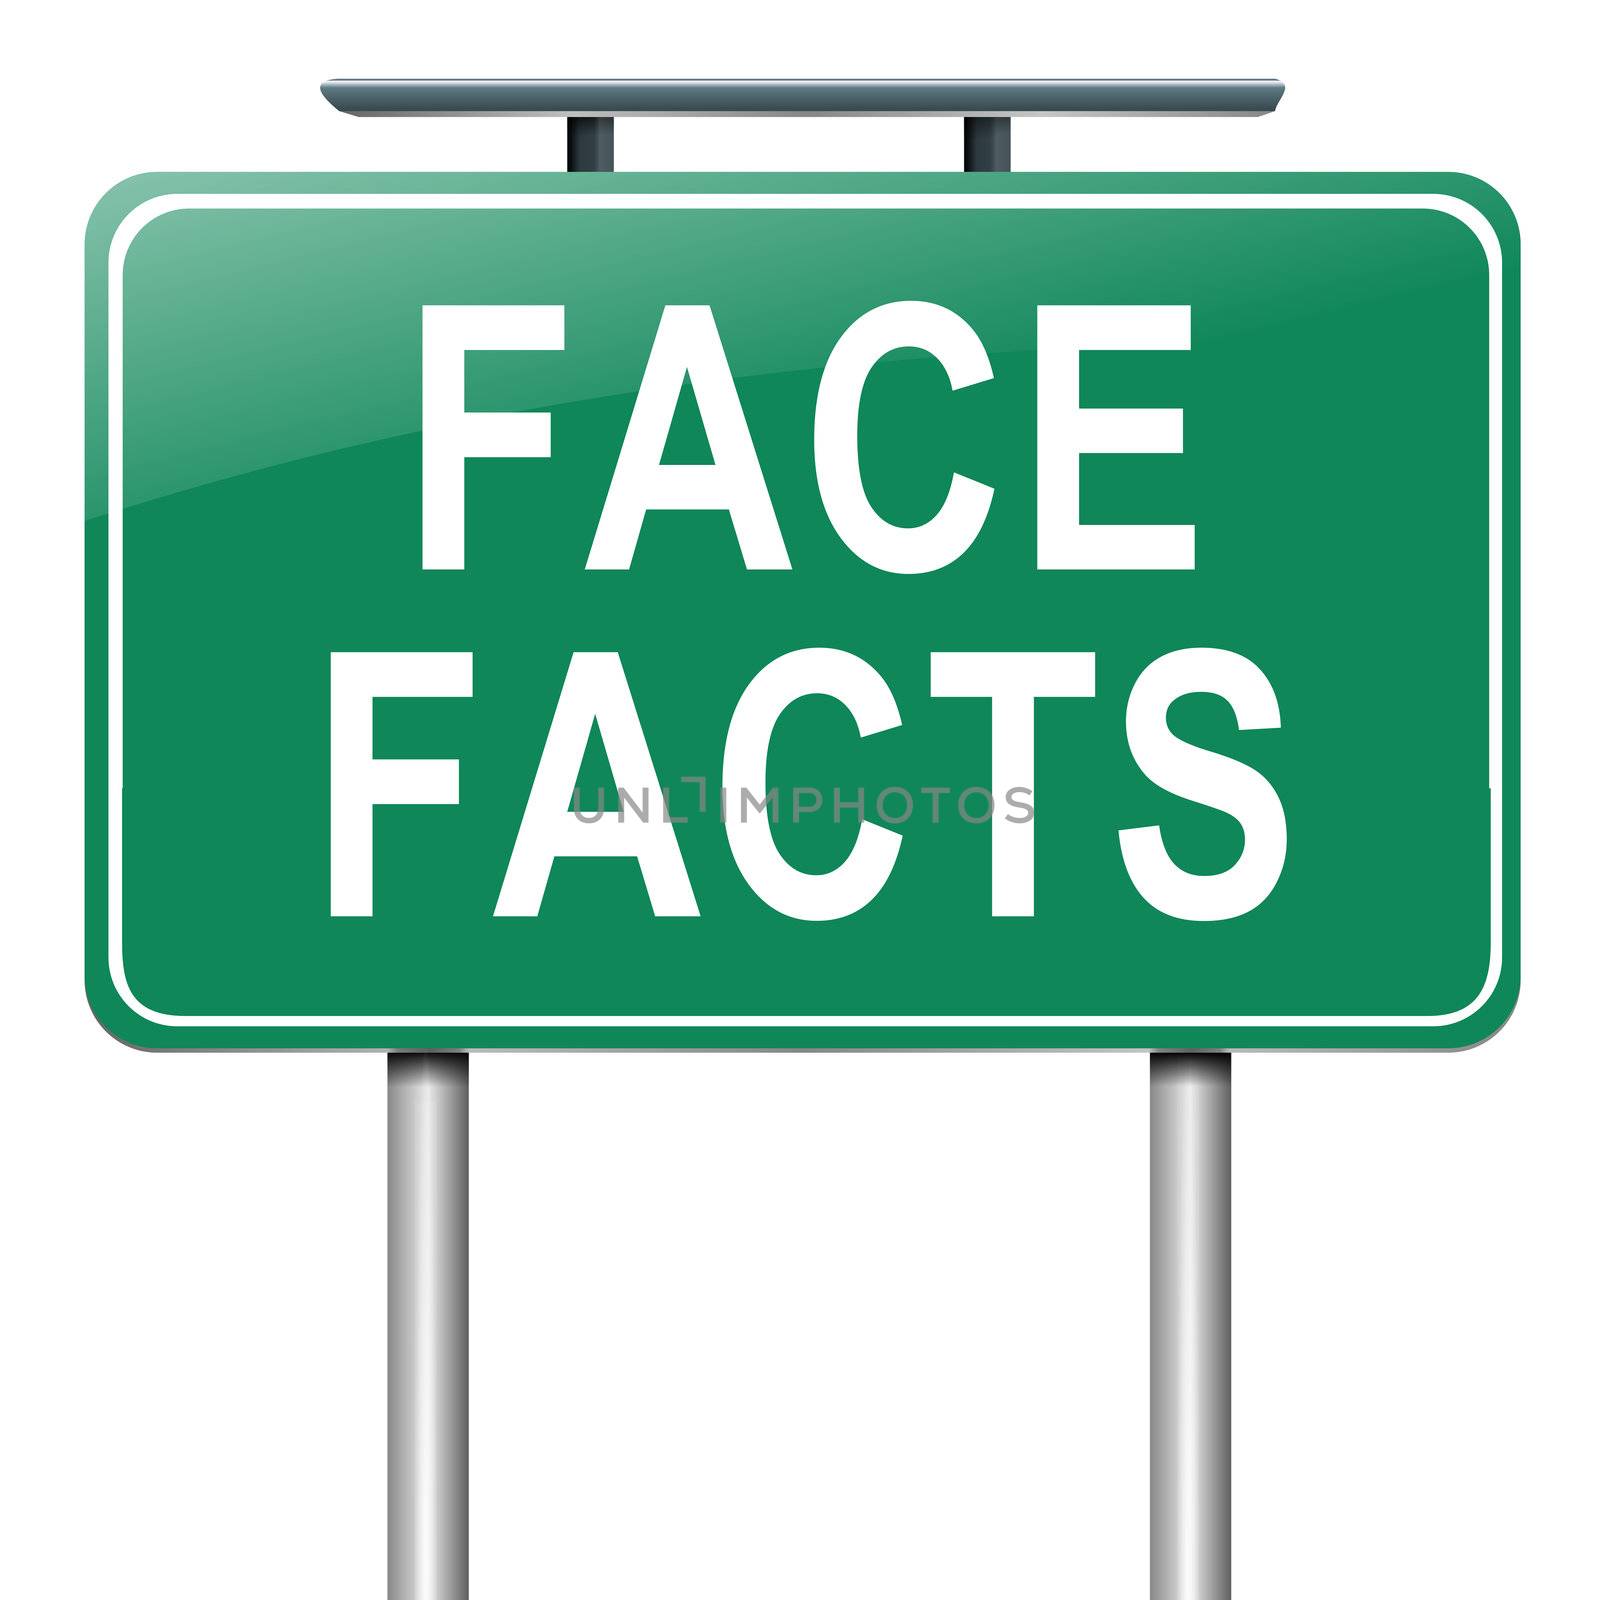 Face facts. by 72soul